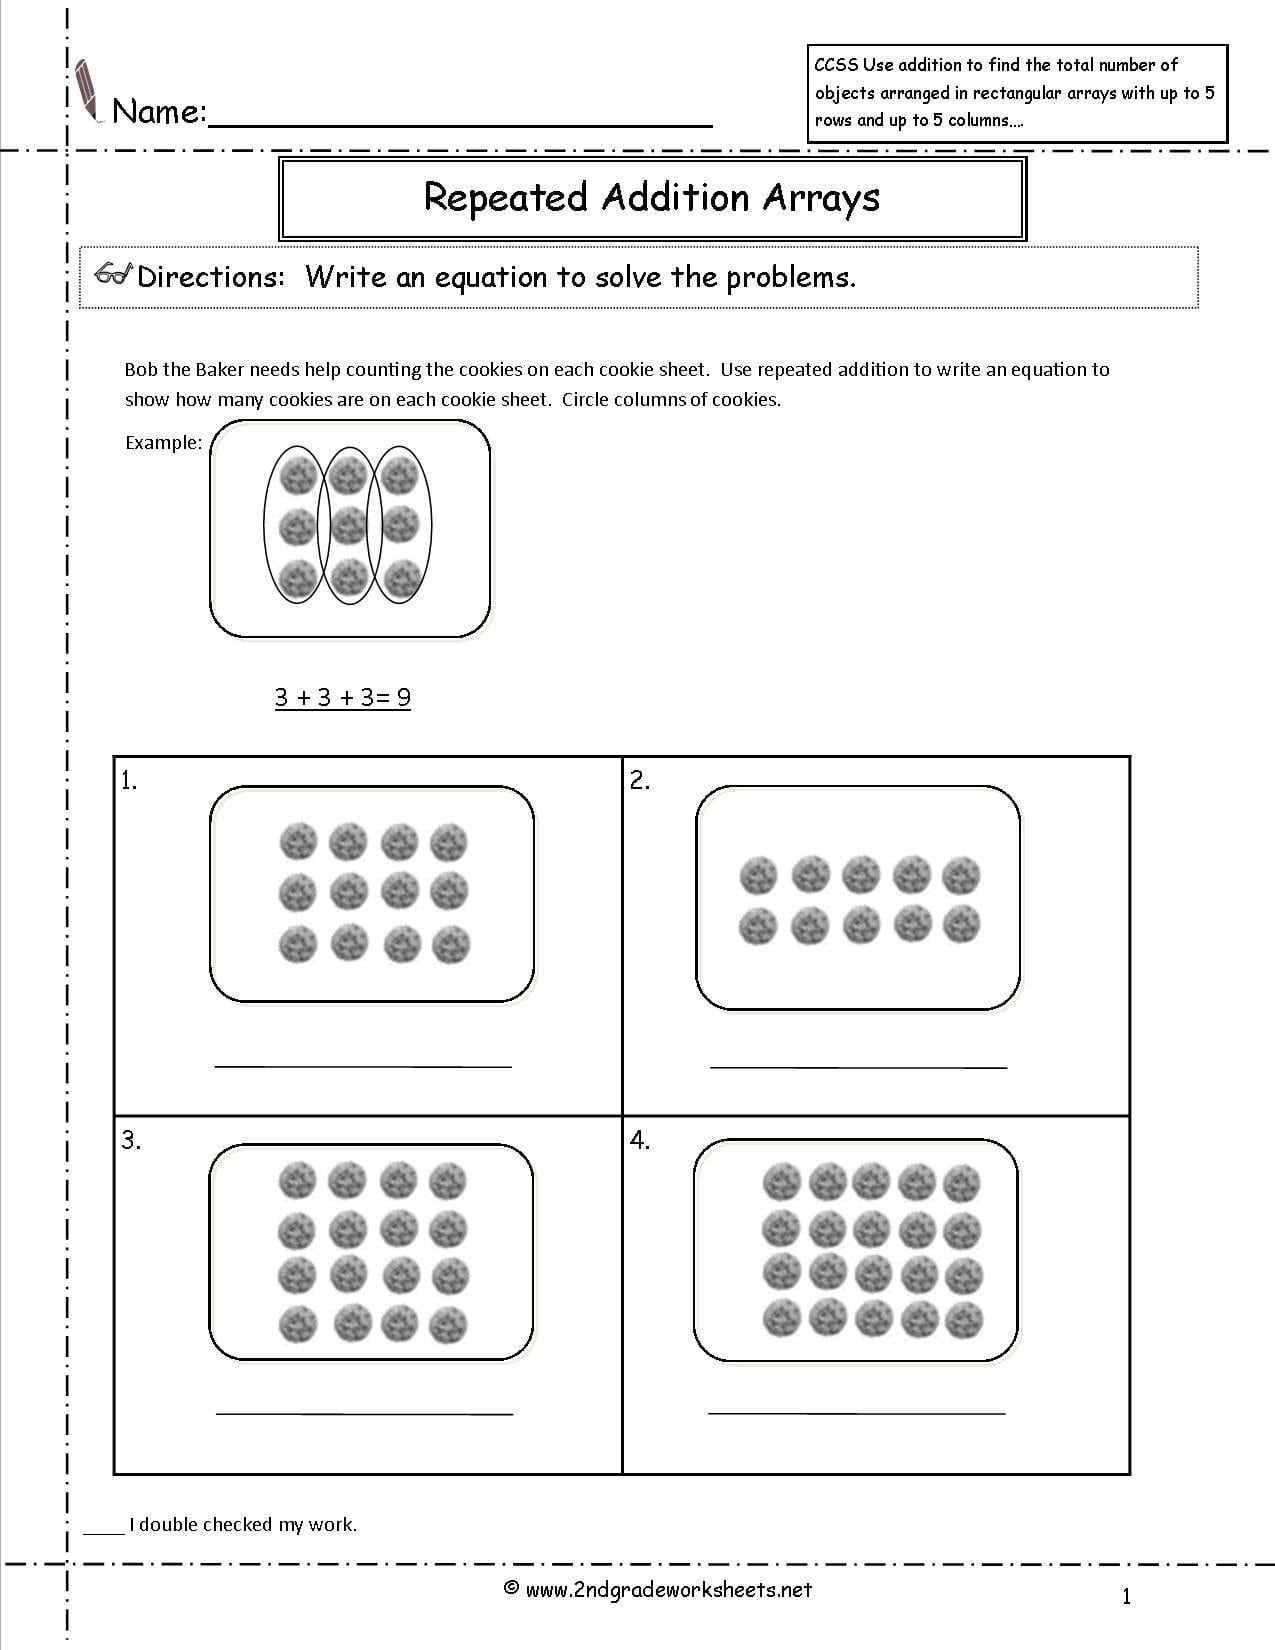 Ccss 2Oa4 Worksheets As Well As Repeated Subtraction Worksheets